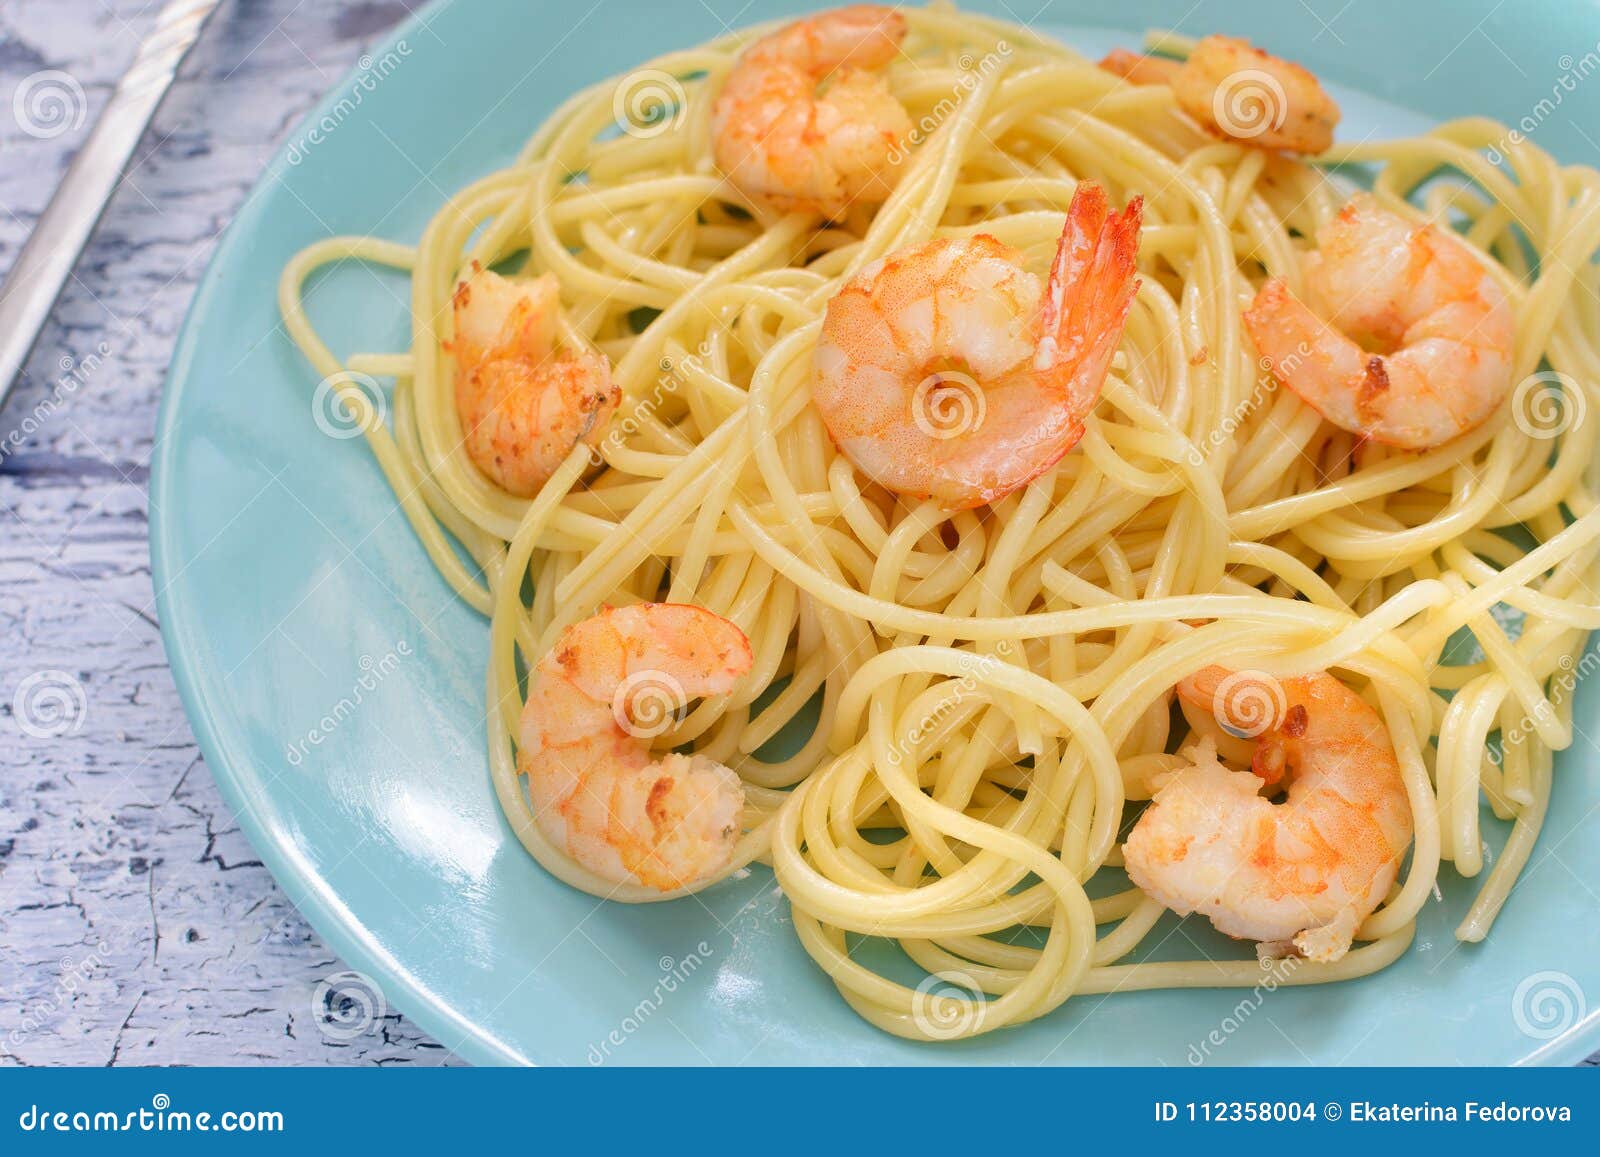 A Nice Delicious Dinner. Spaghetti with Shrimps on Blue Plates. Stock